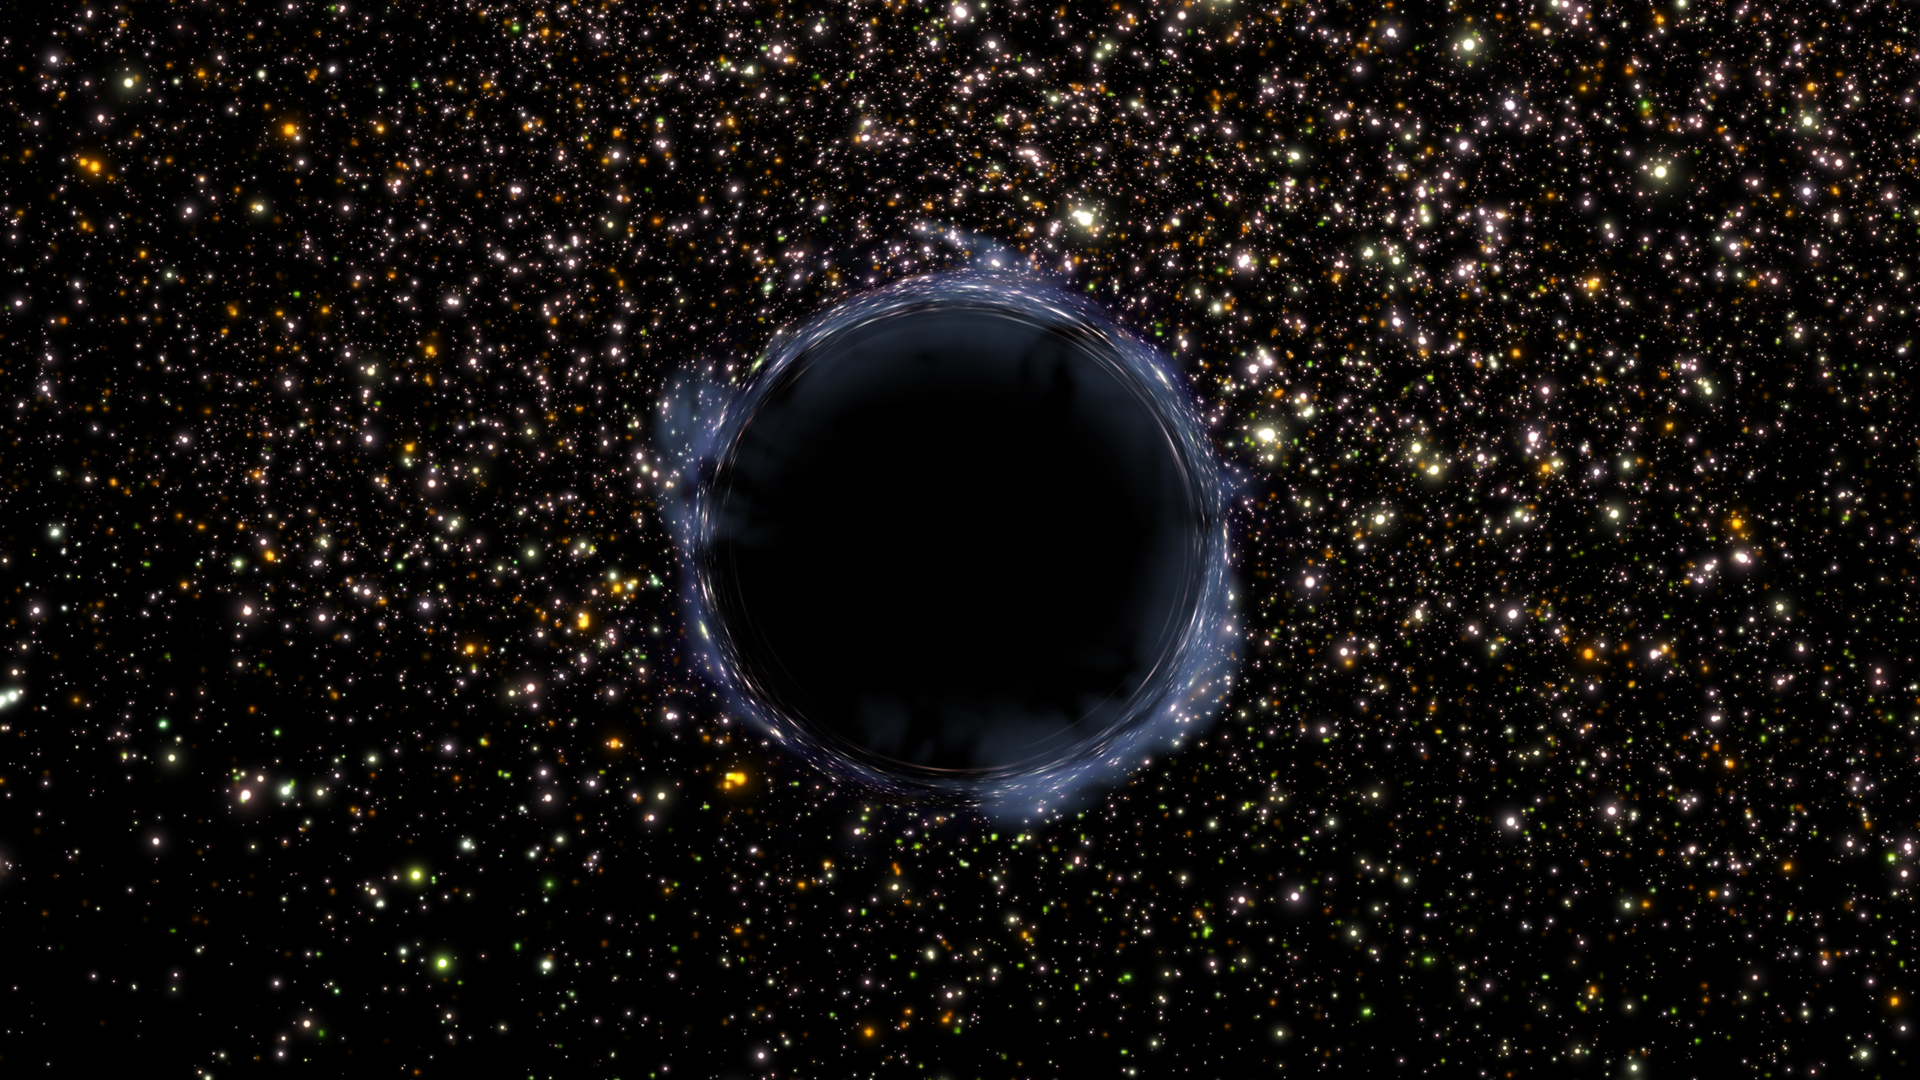 Hubble Space Telescope finds new evidence of a mid-sized black hole